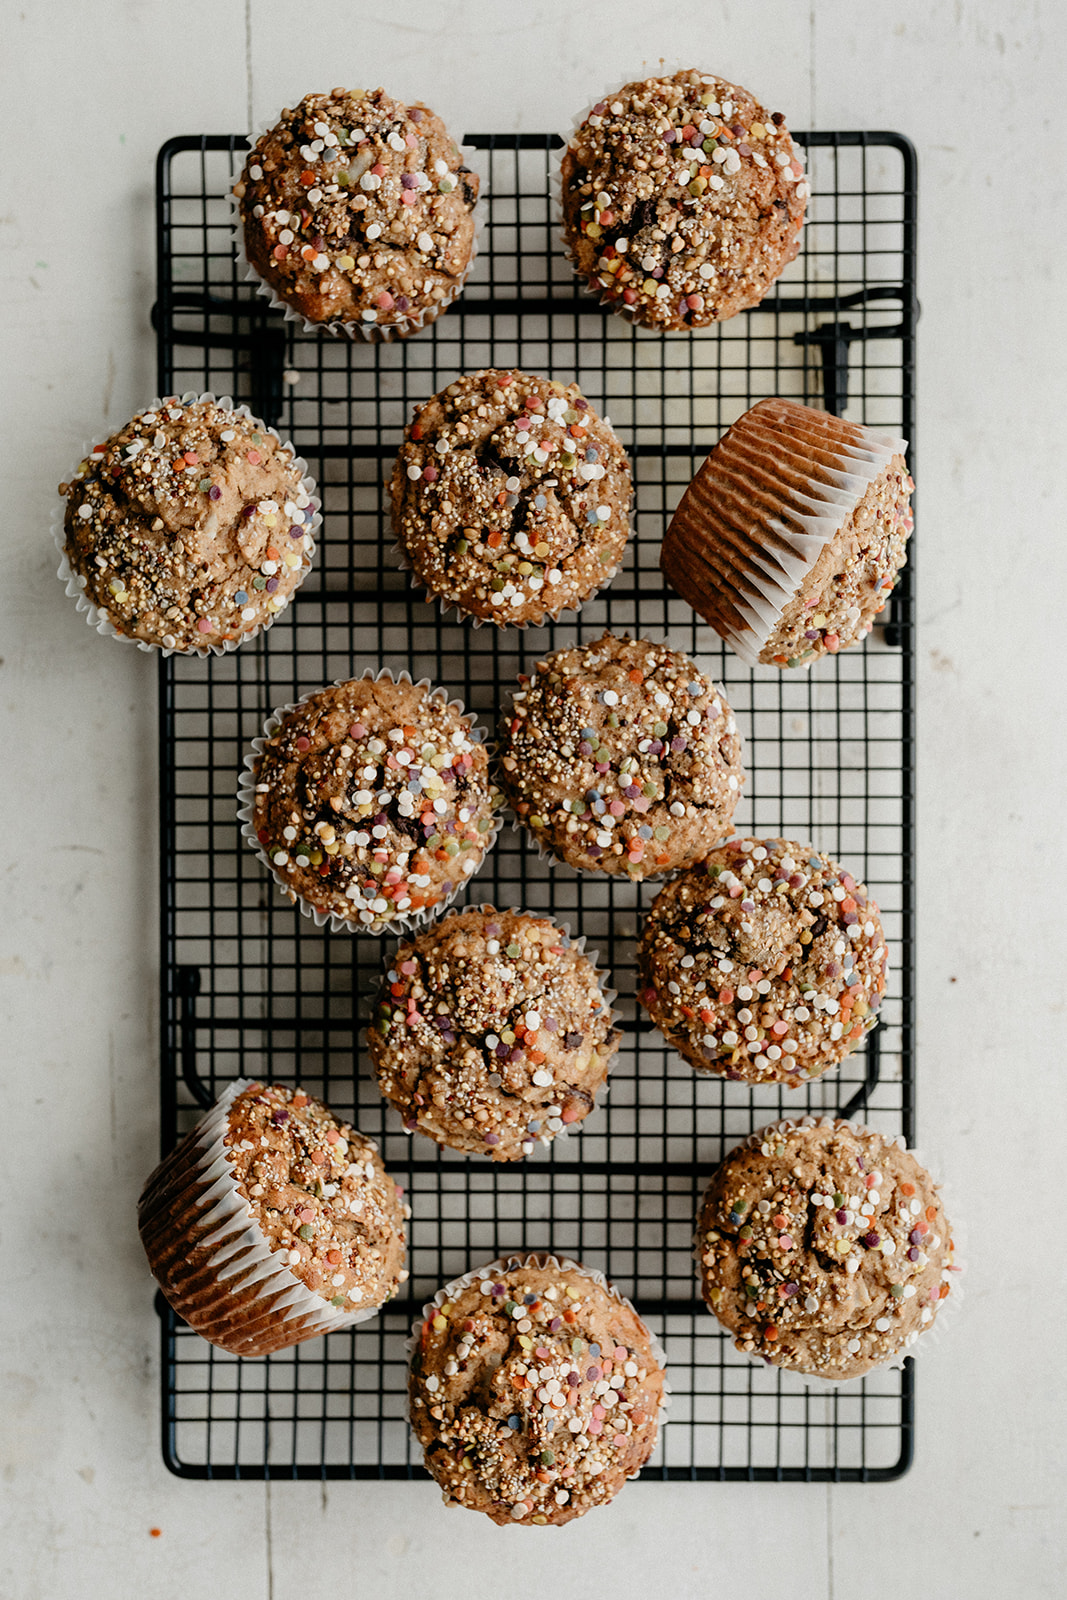 Chocolate Peanut Butter Oatmeal Muffins - Molly Yeh